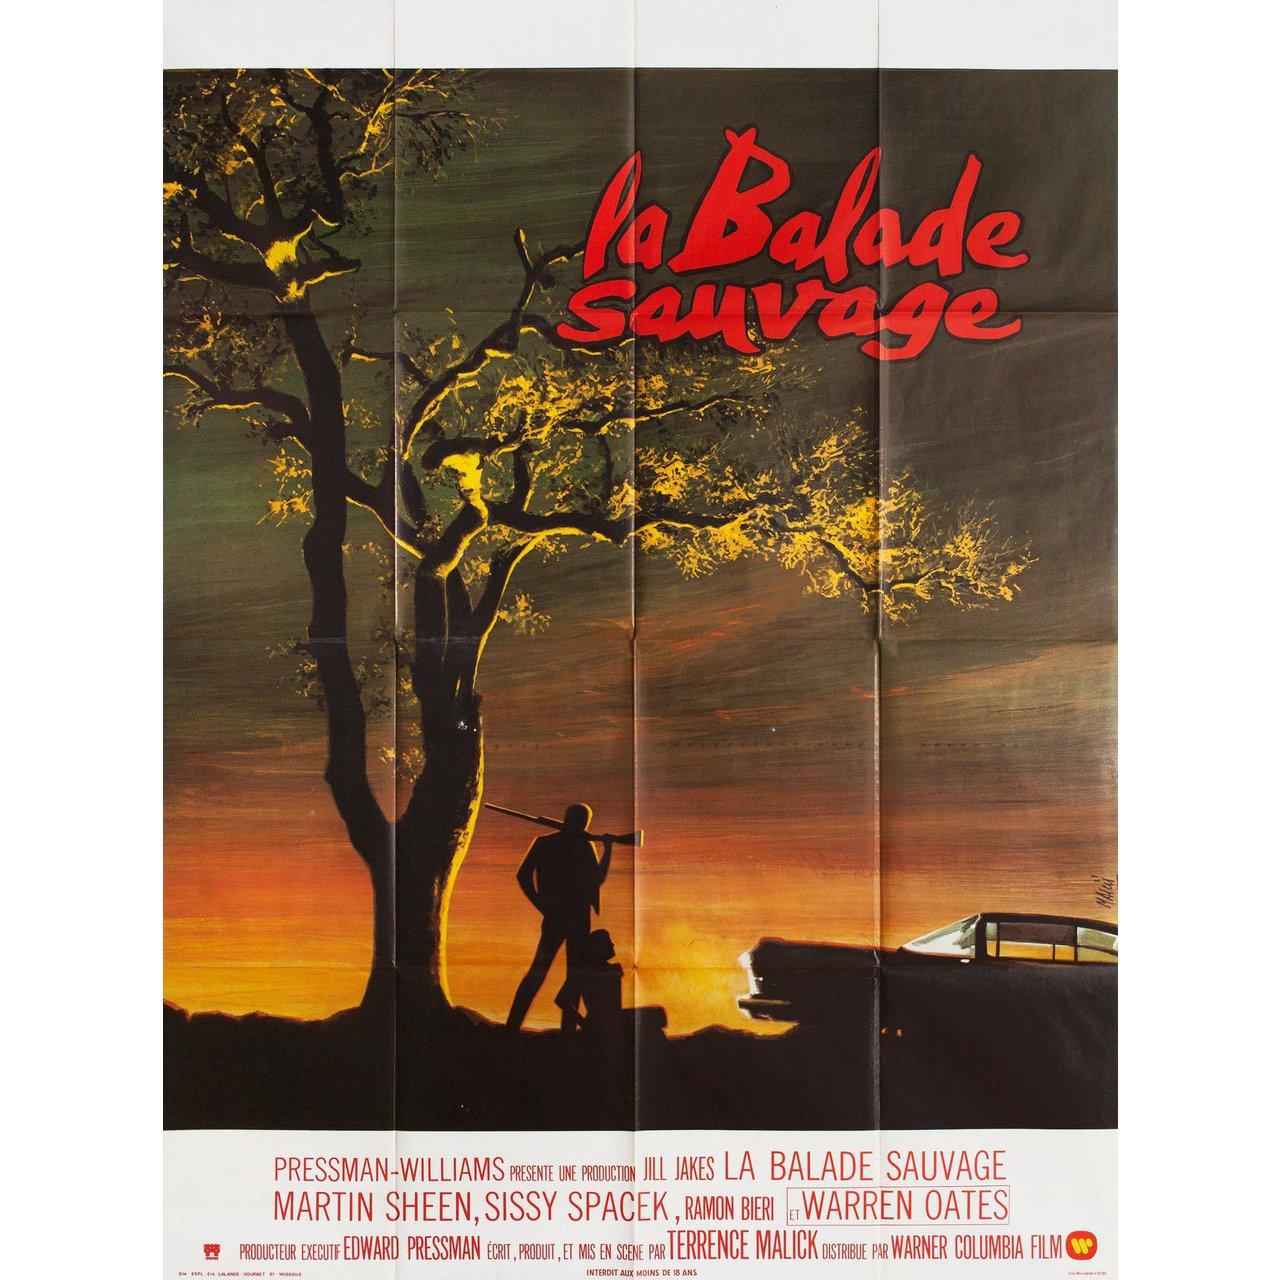 Original 1974 French grande poster by Jean Mascii for the film Badlands directed by Terrence Malick with Martin Sheen / Sissy Spacek / Warren Oates / Ramon Bieri. Very good-fine condition, folded. Many original posters were issued folded or were